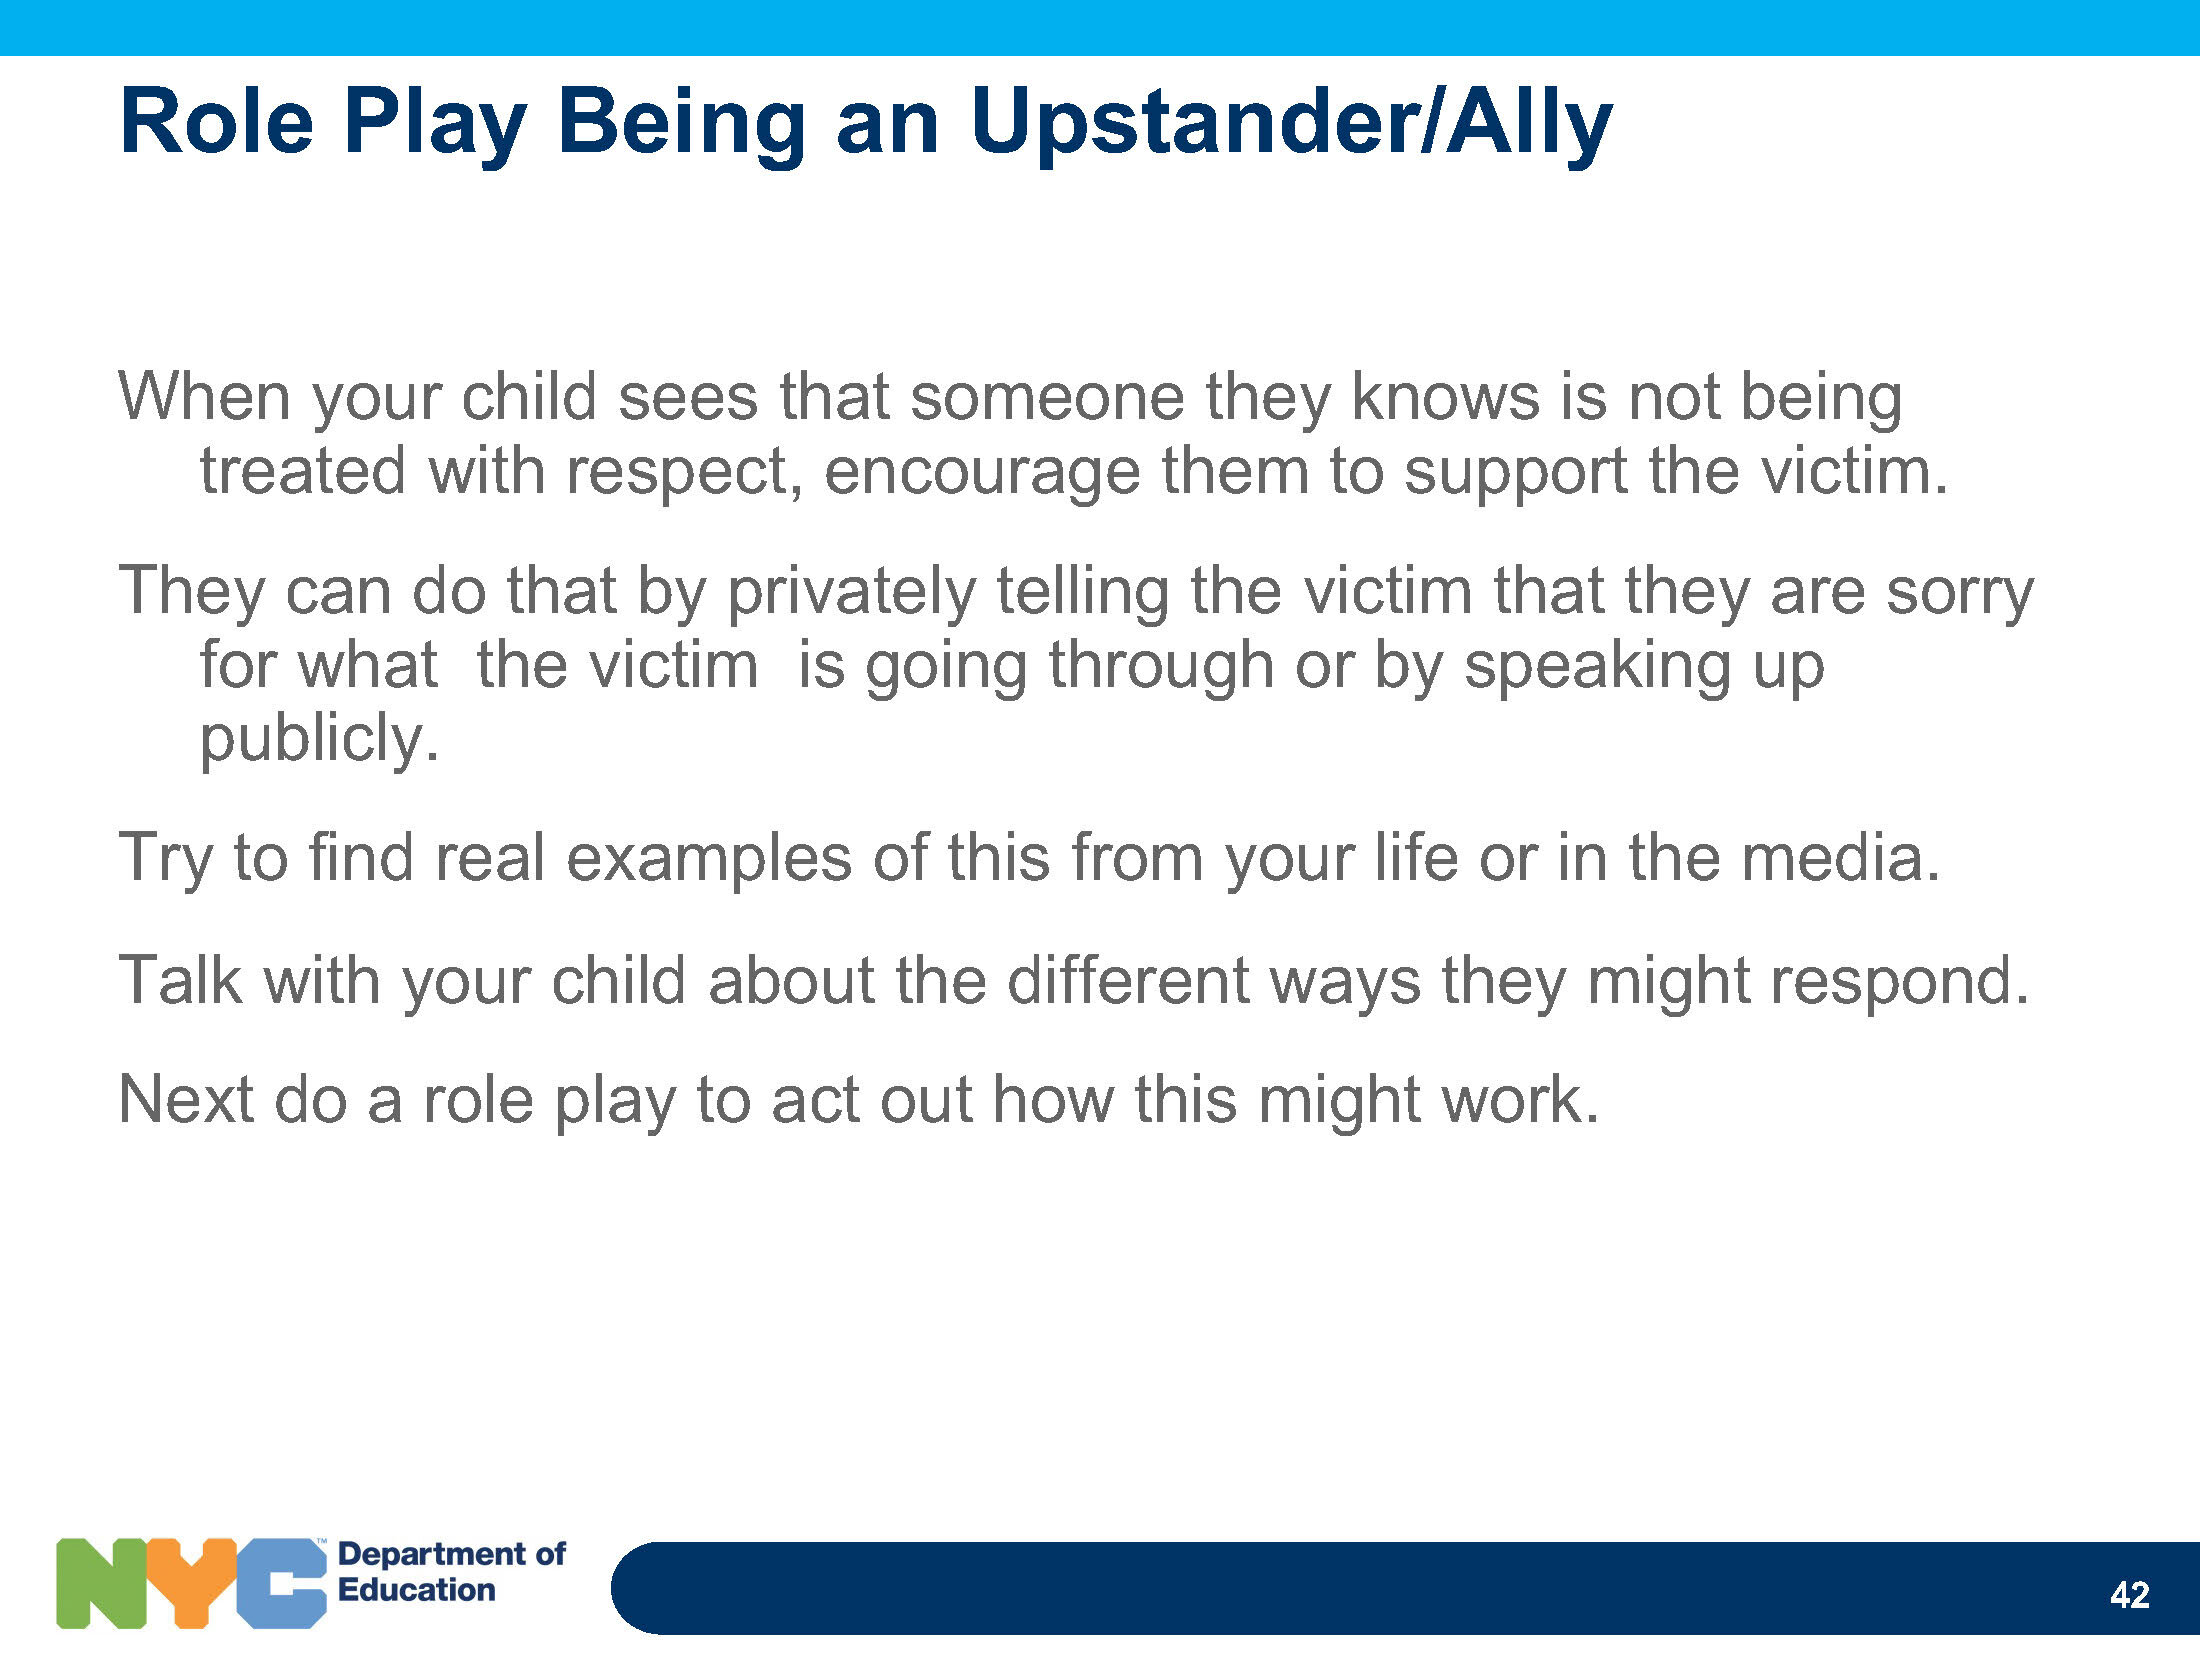 face-bullying-and-cyberbullying-presentation-for-parents_Page_42.jpg